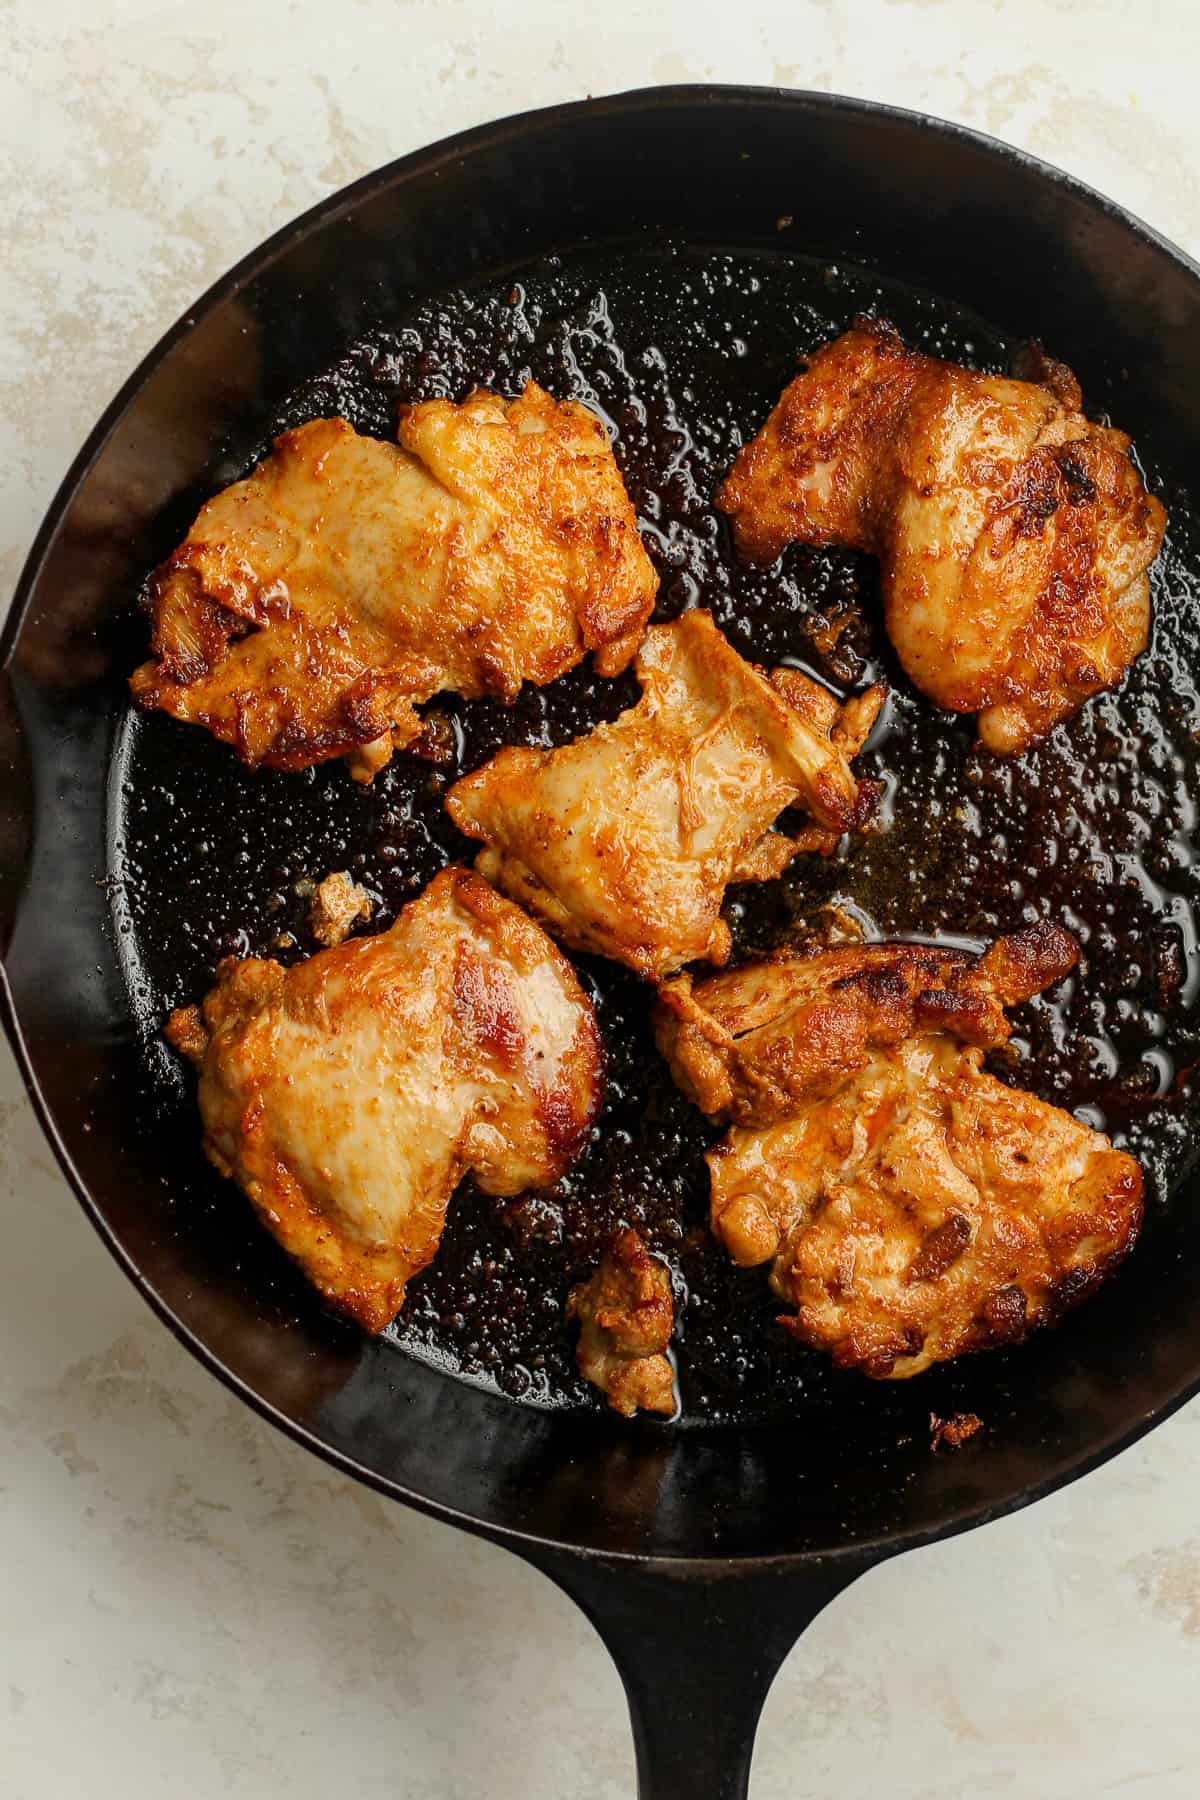 A skillet of seared chicken thighs.